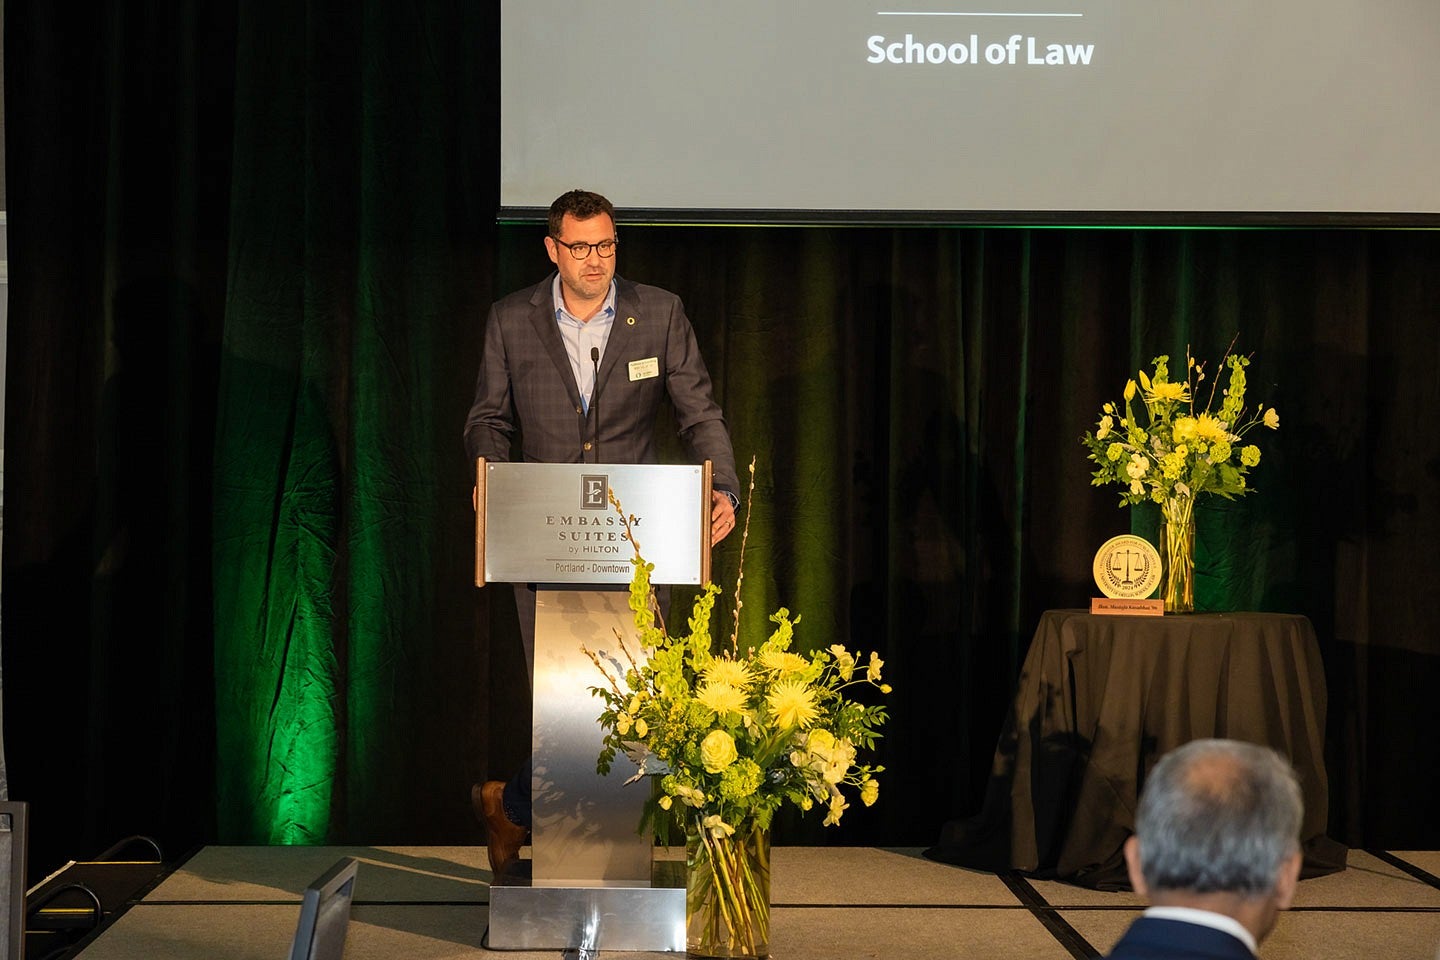 Matthew Schroettnig speaking at a podium on stage before an audience for the Frohnmayer Awards with a green curtain and projection screen that reads "School of Law" behind him.